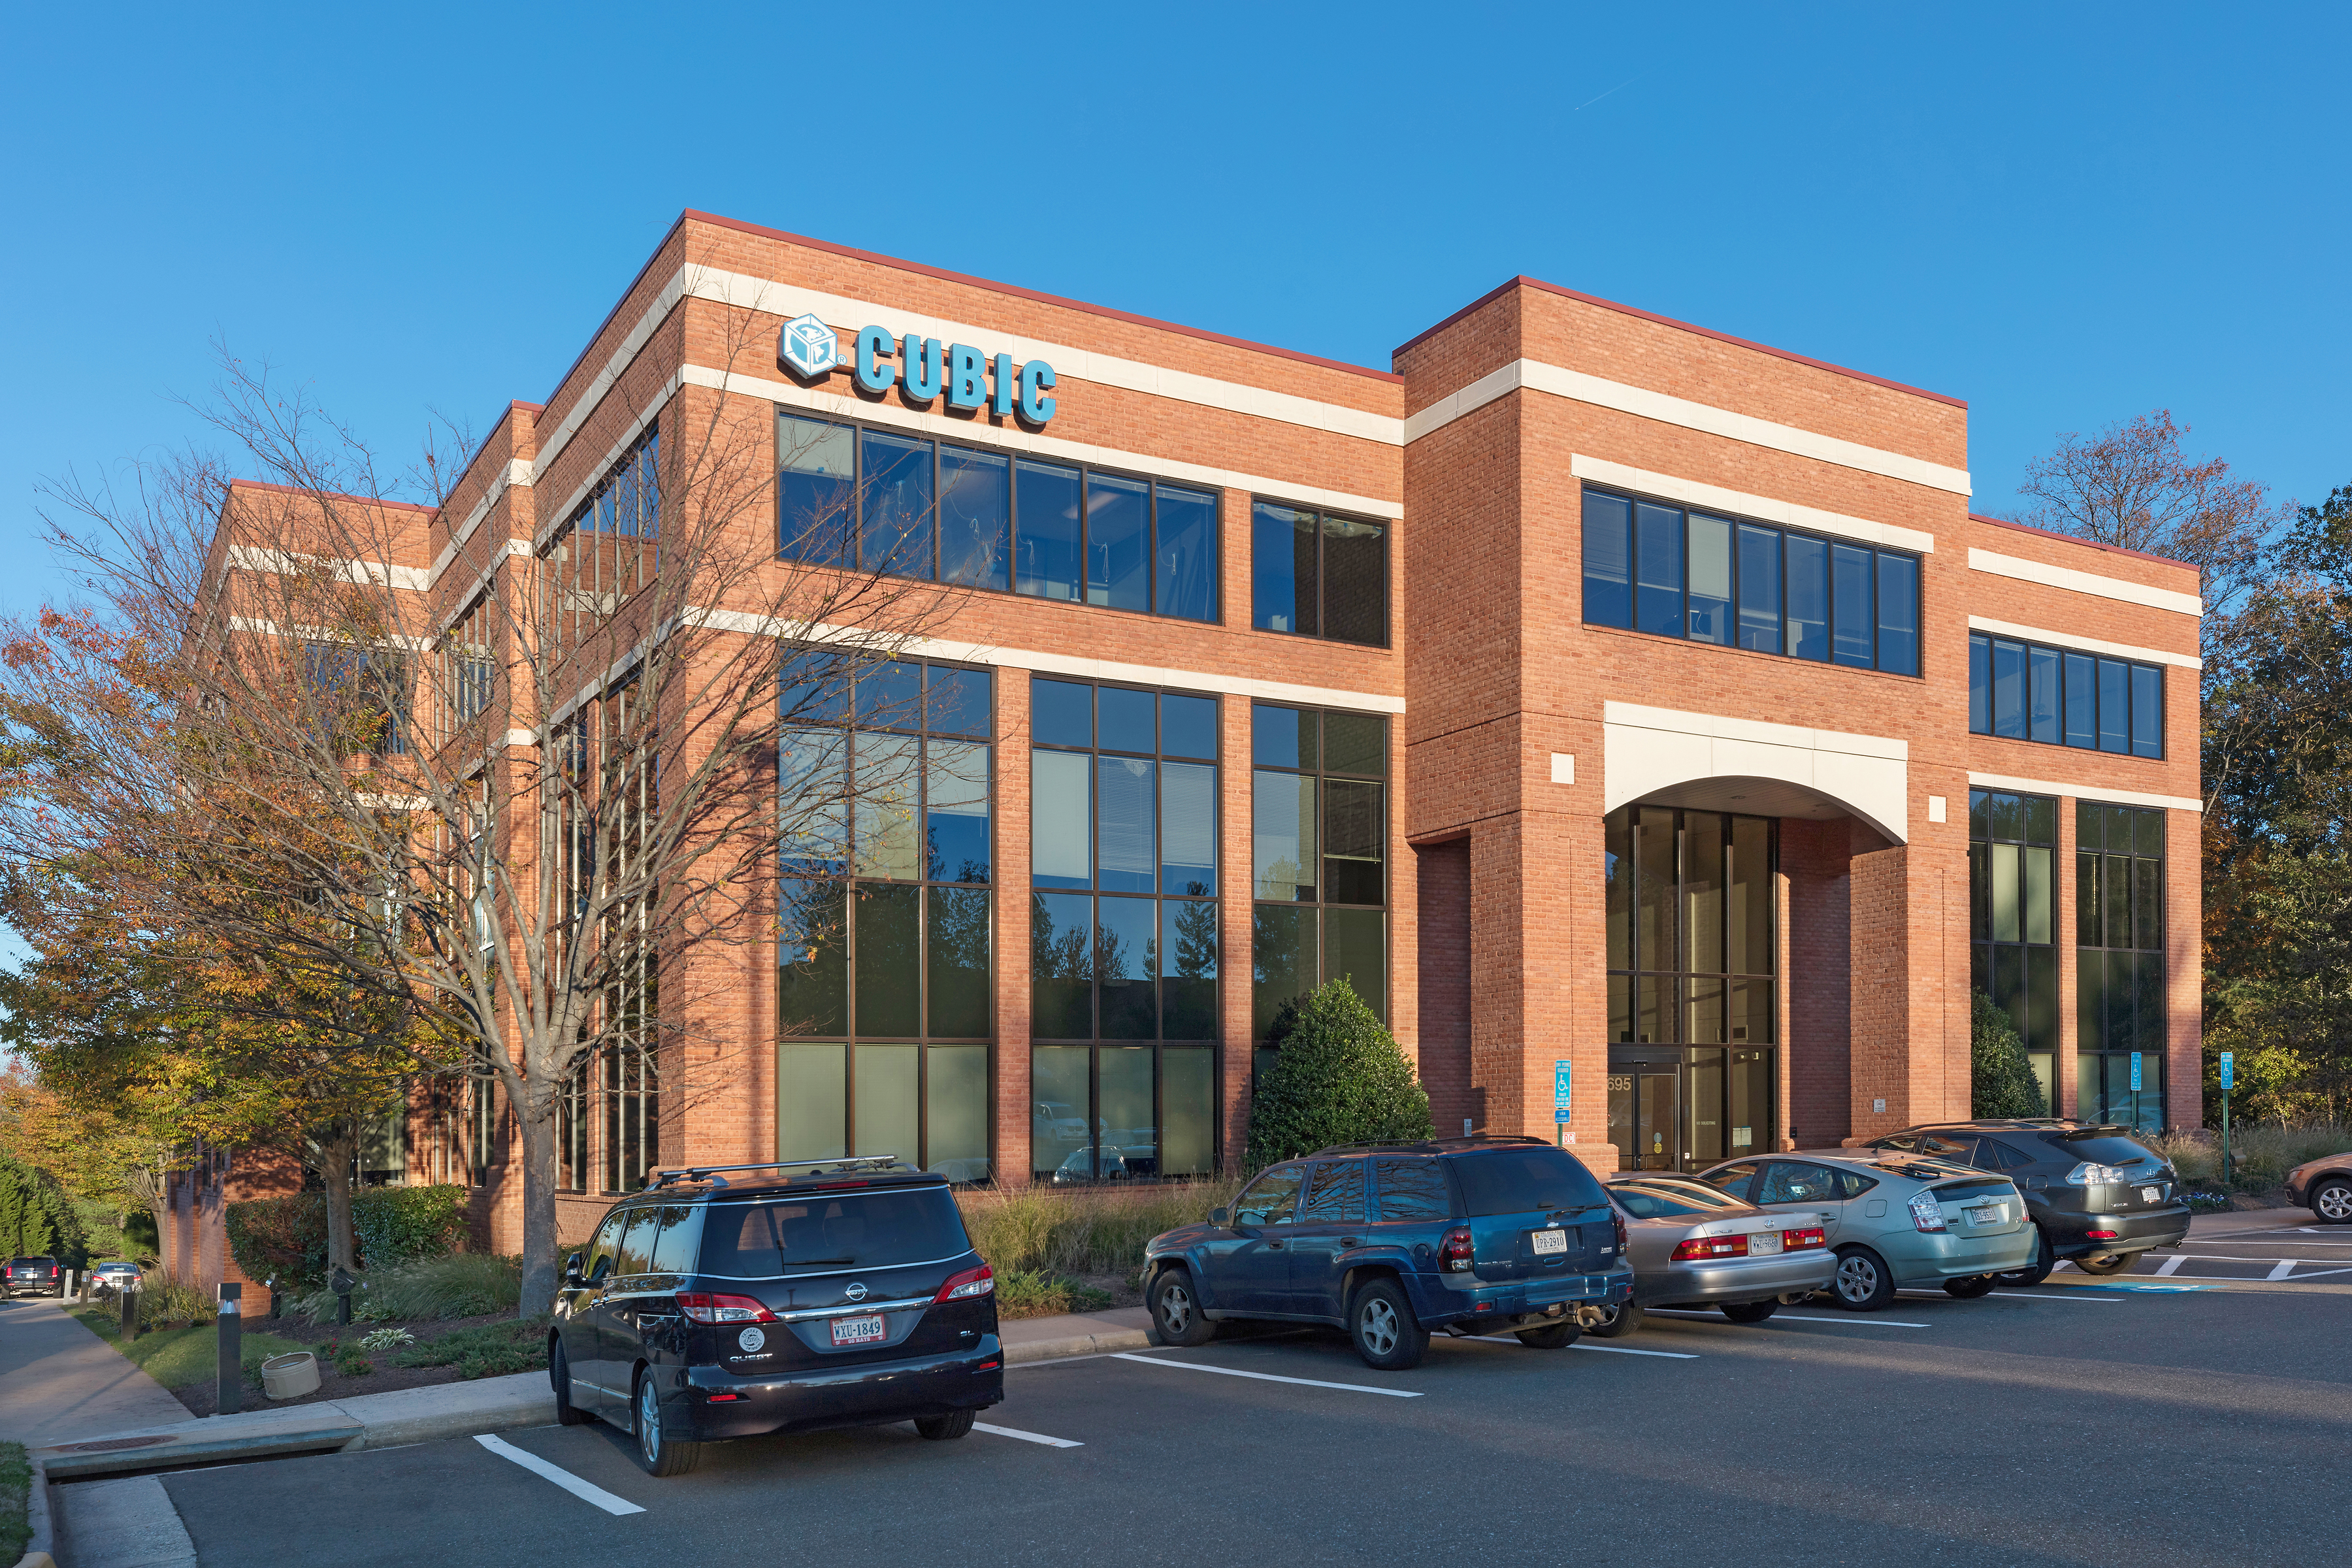 Avison Young brokers sale and financing of prime office buildings in Kingstowne, VA